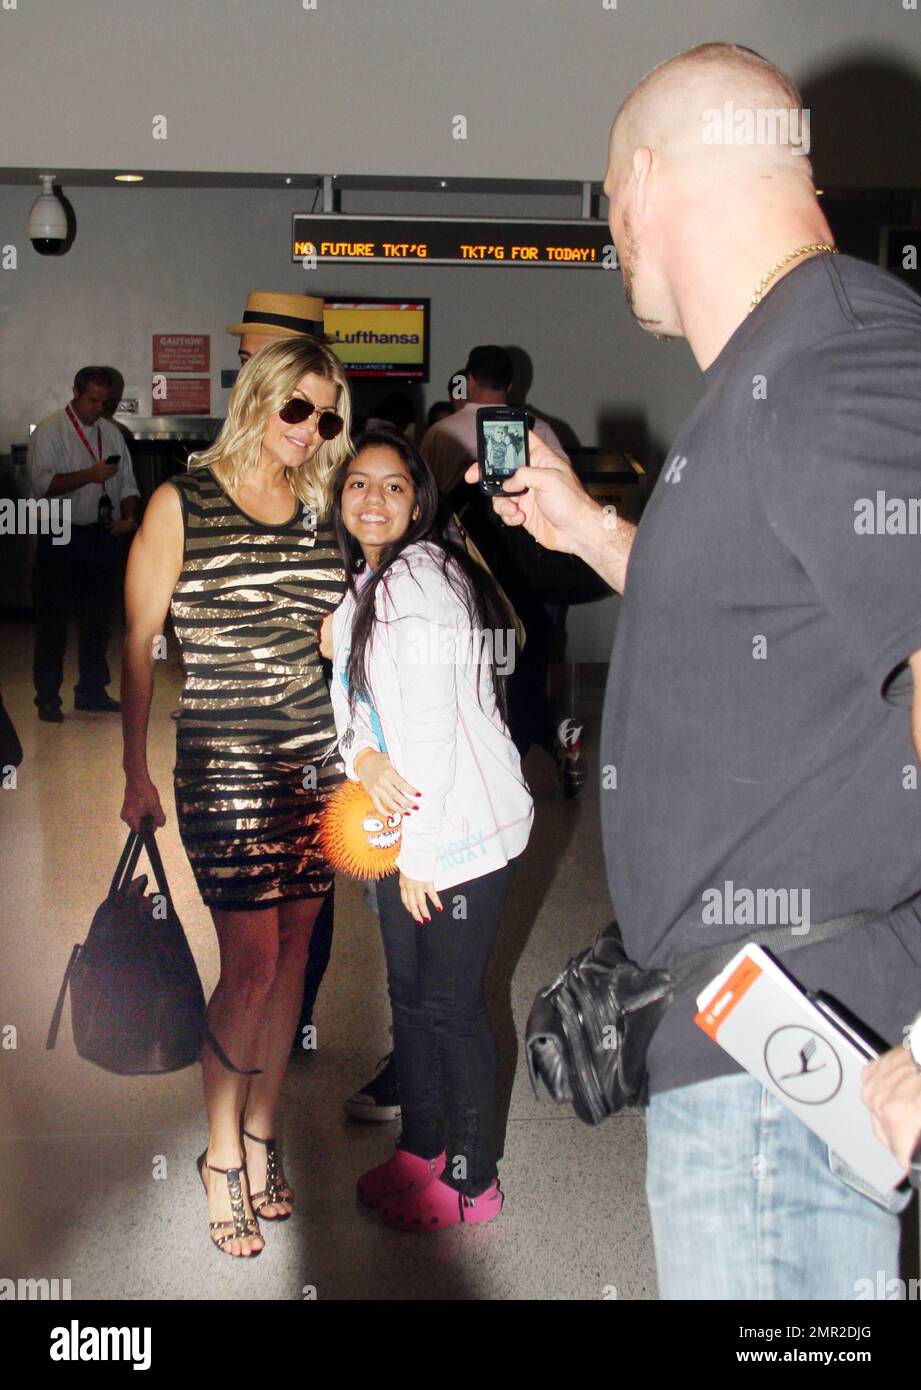 fergie showed off her incredible figure in a camouflage dress as she made her way through the airport accompanied by pals and security the singer stopped to pose for photos with fans before heading off to catch her flight she had been in town to support the dolphins a team she is part owner of in the season opener last night the dolphins lost but fergie still appeared to be in great spirits miami fl 13th september 2011 2MR2DJG